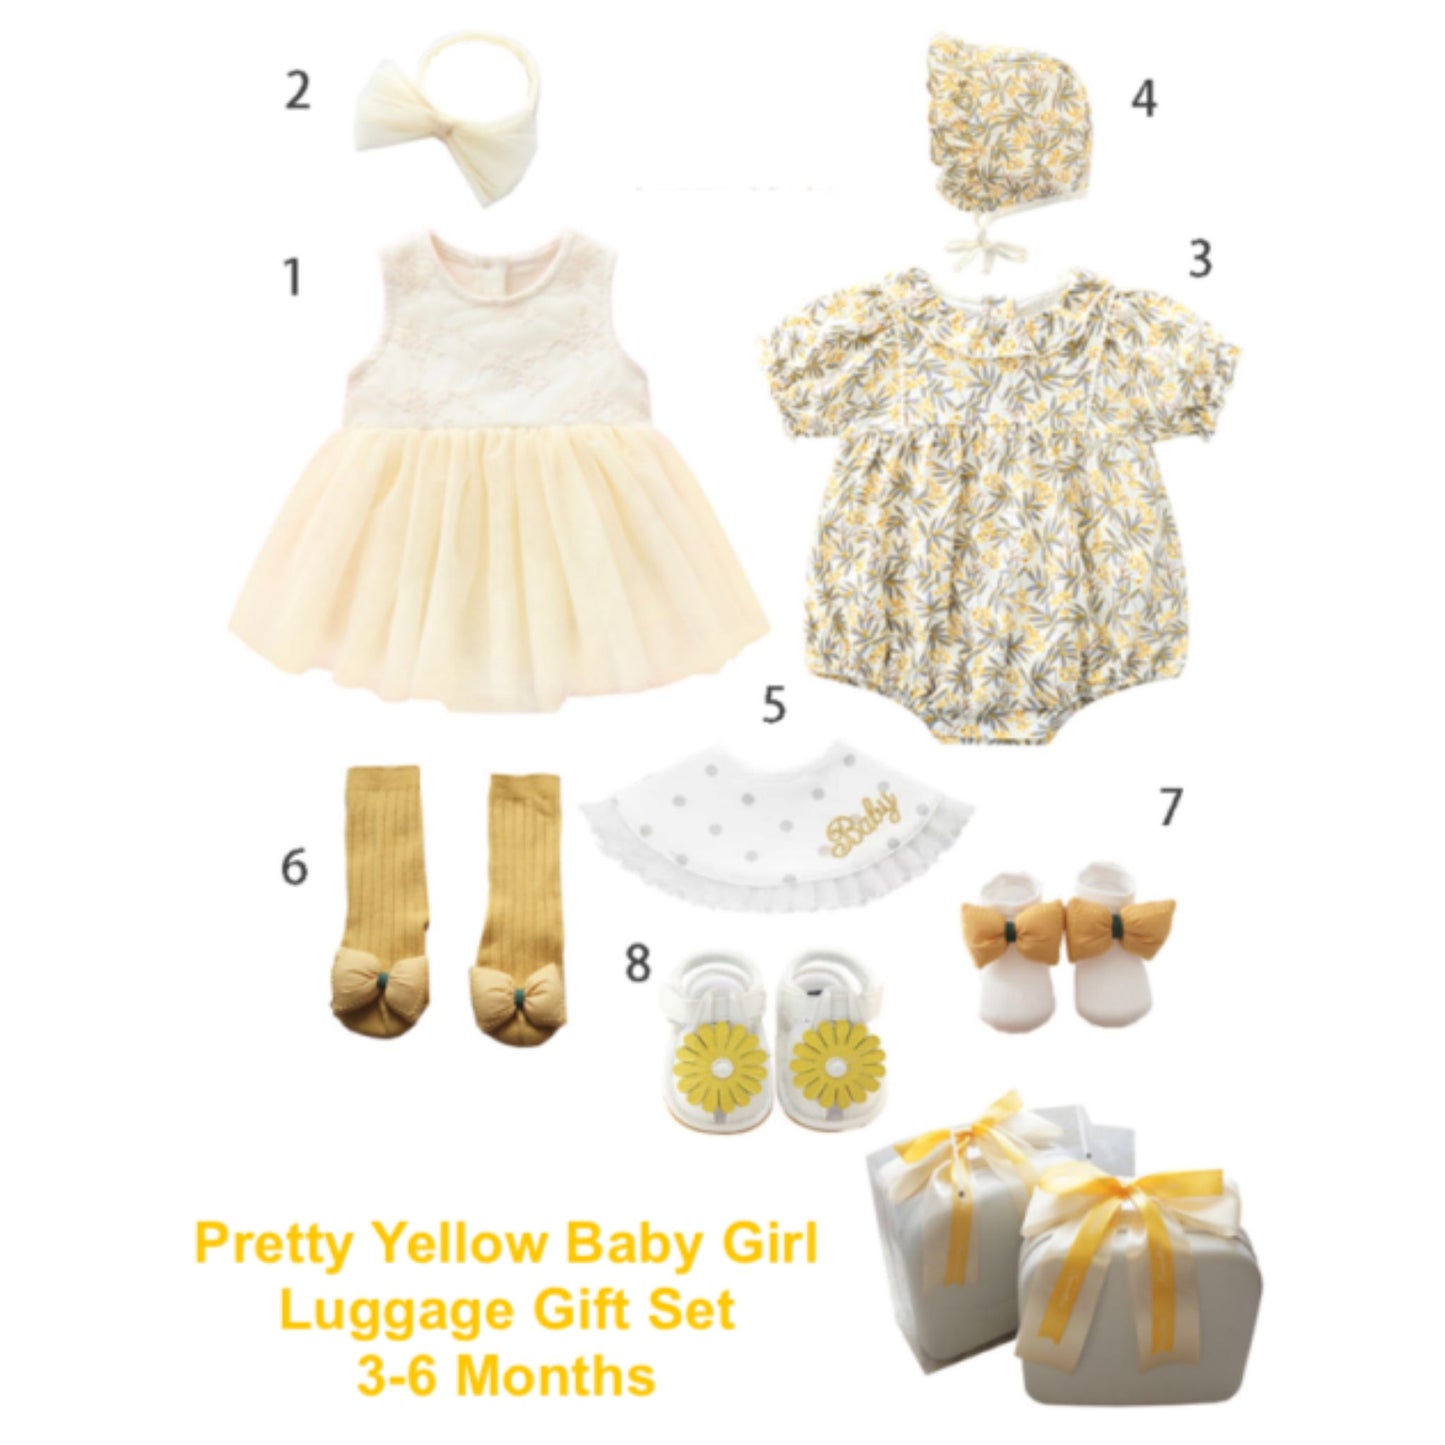 Pretty Yellow Baby Girl Luggage Gift Set 3-6 Months